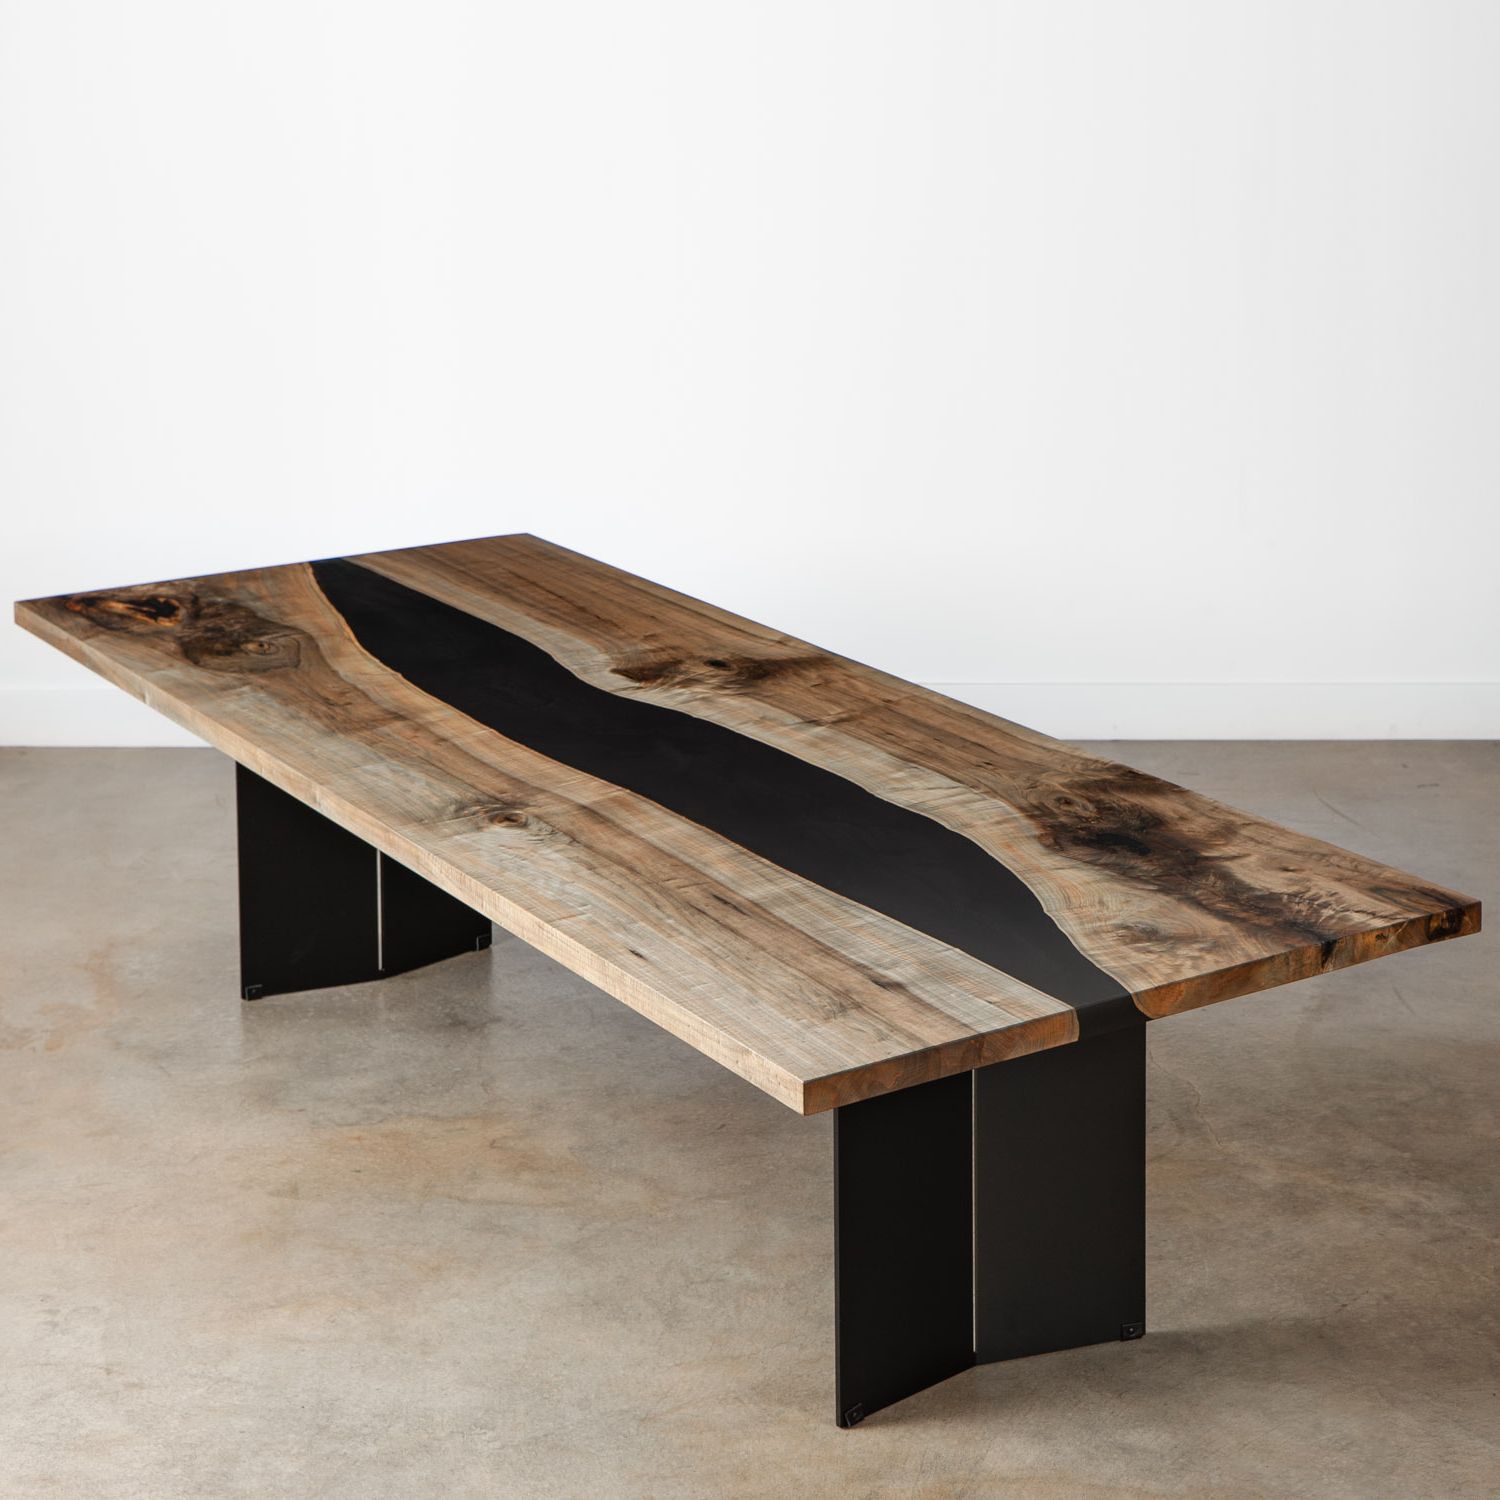 Famous Oxidized Coffee Tables With Regard To Oxidized Maple Dining Table No (View 4 of 20)